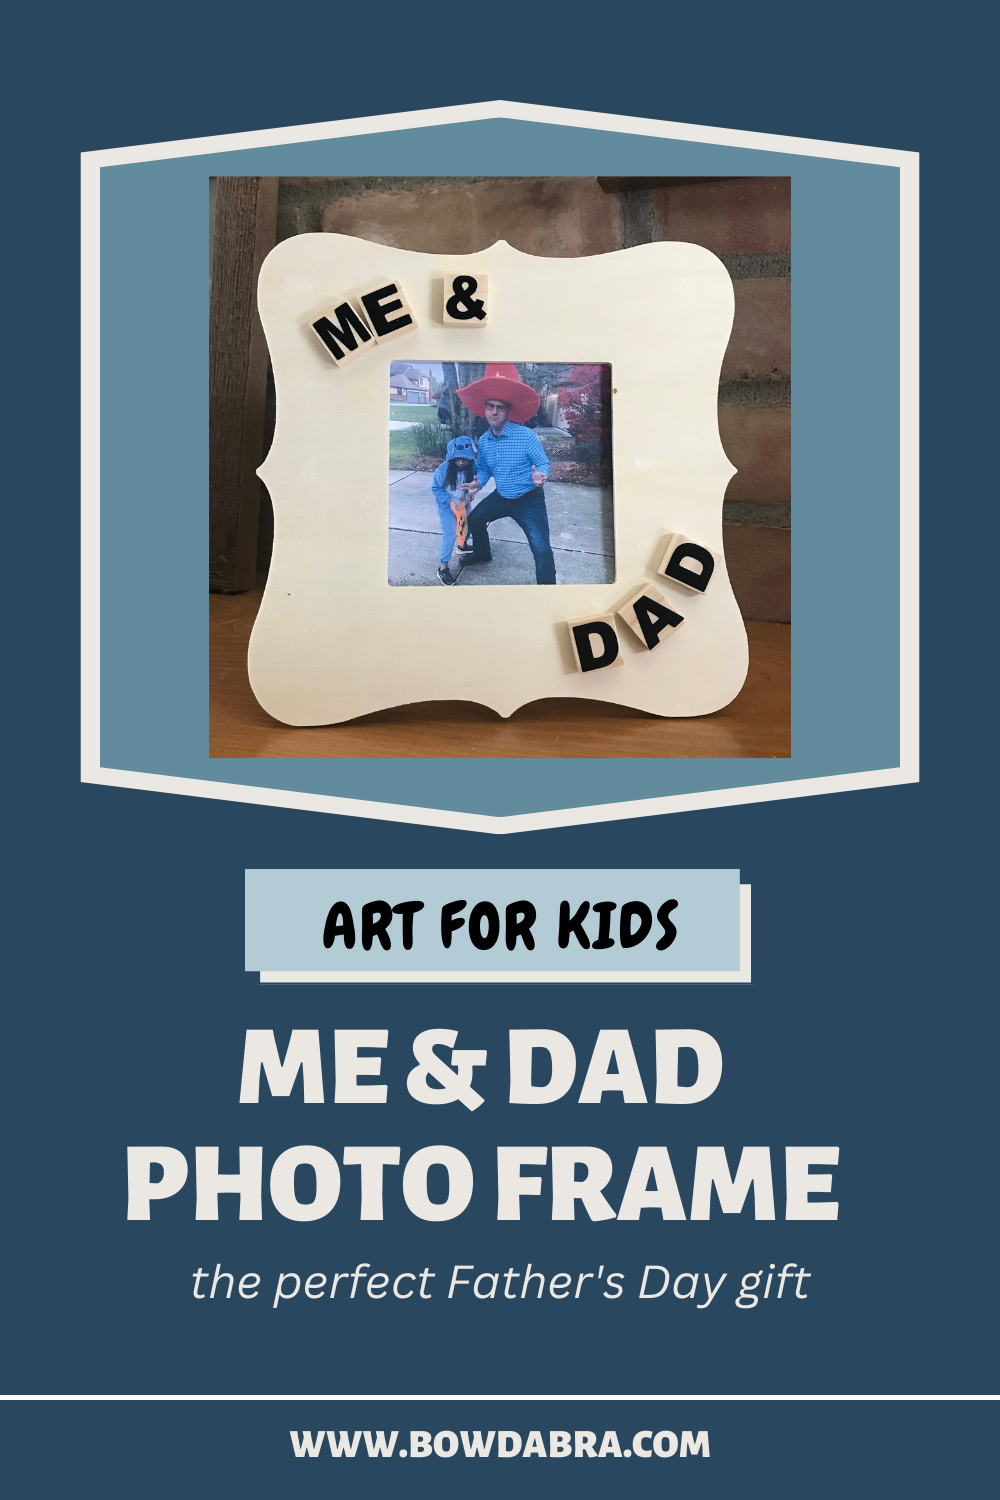 Me & Dad Father's Day Photo Frame